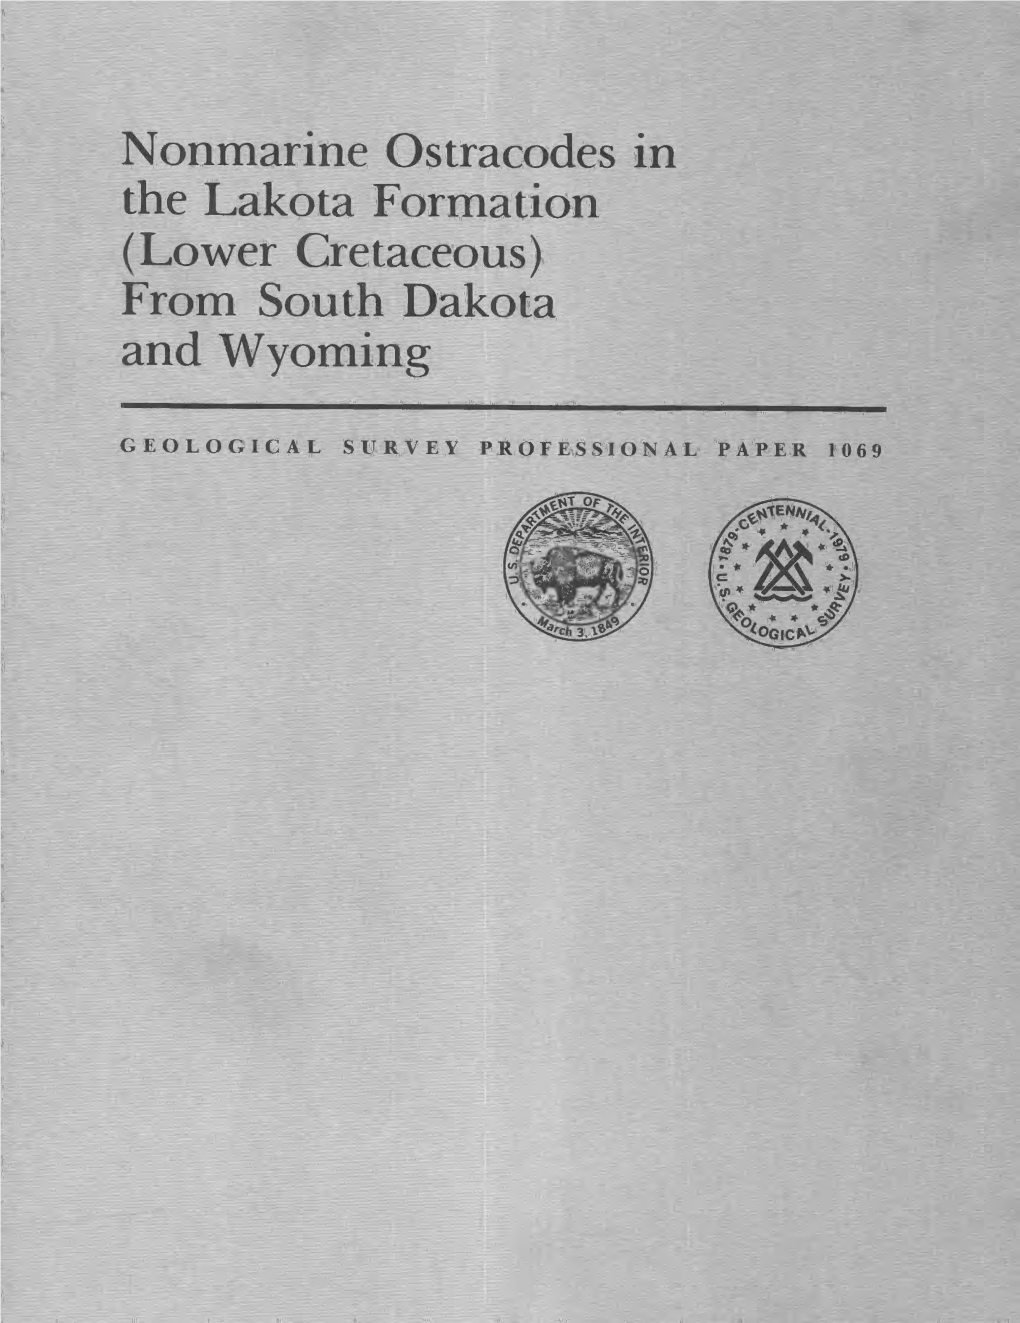 Nonmarine Ostracodes in the Lakota Formation (Lower Cretaceous) from South Dakota and Wyoming